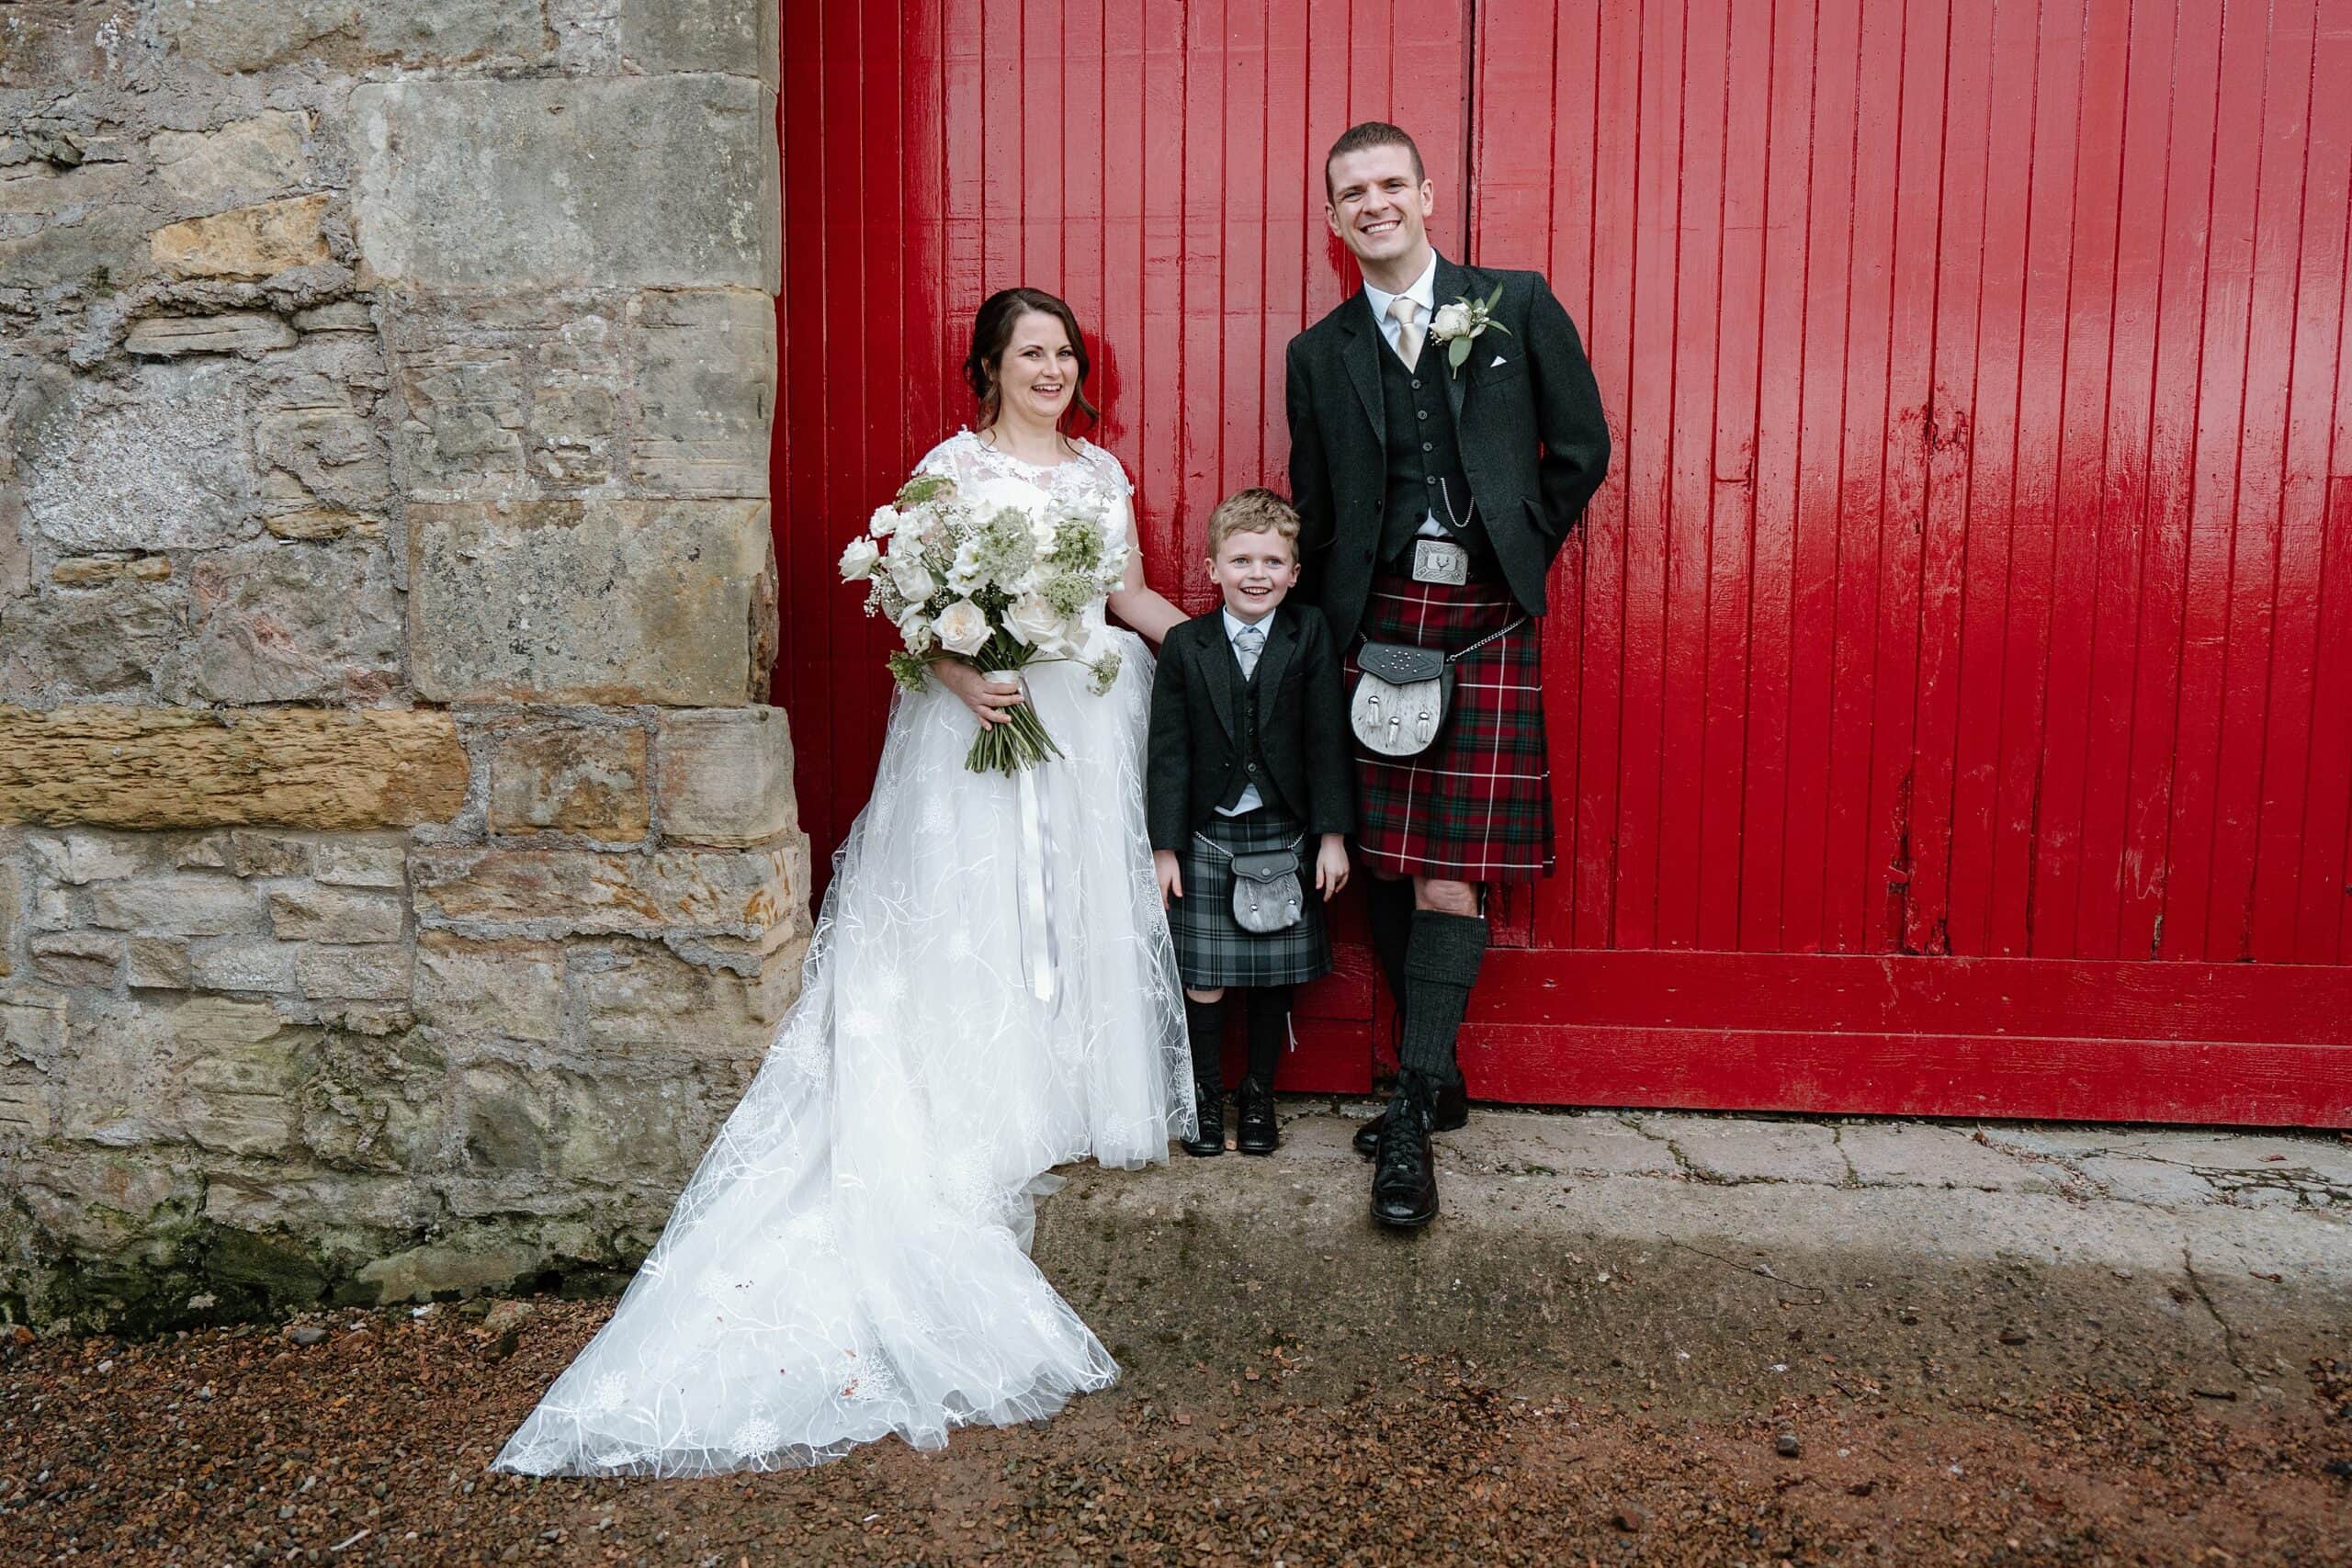 kinkell byre wedding photos of bride and groom outside venue with red barn doors in background at st andrews wedding venue